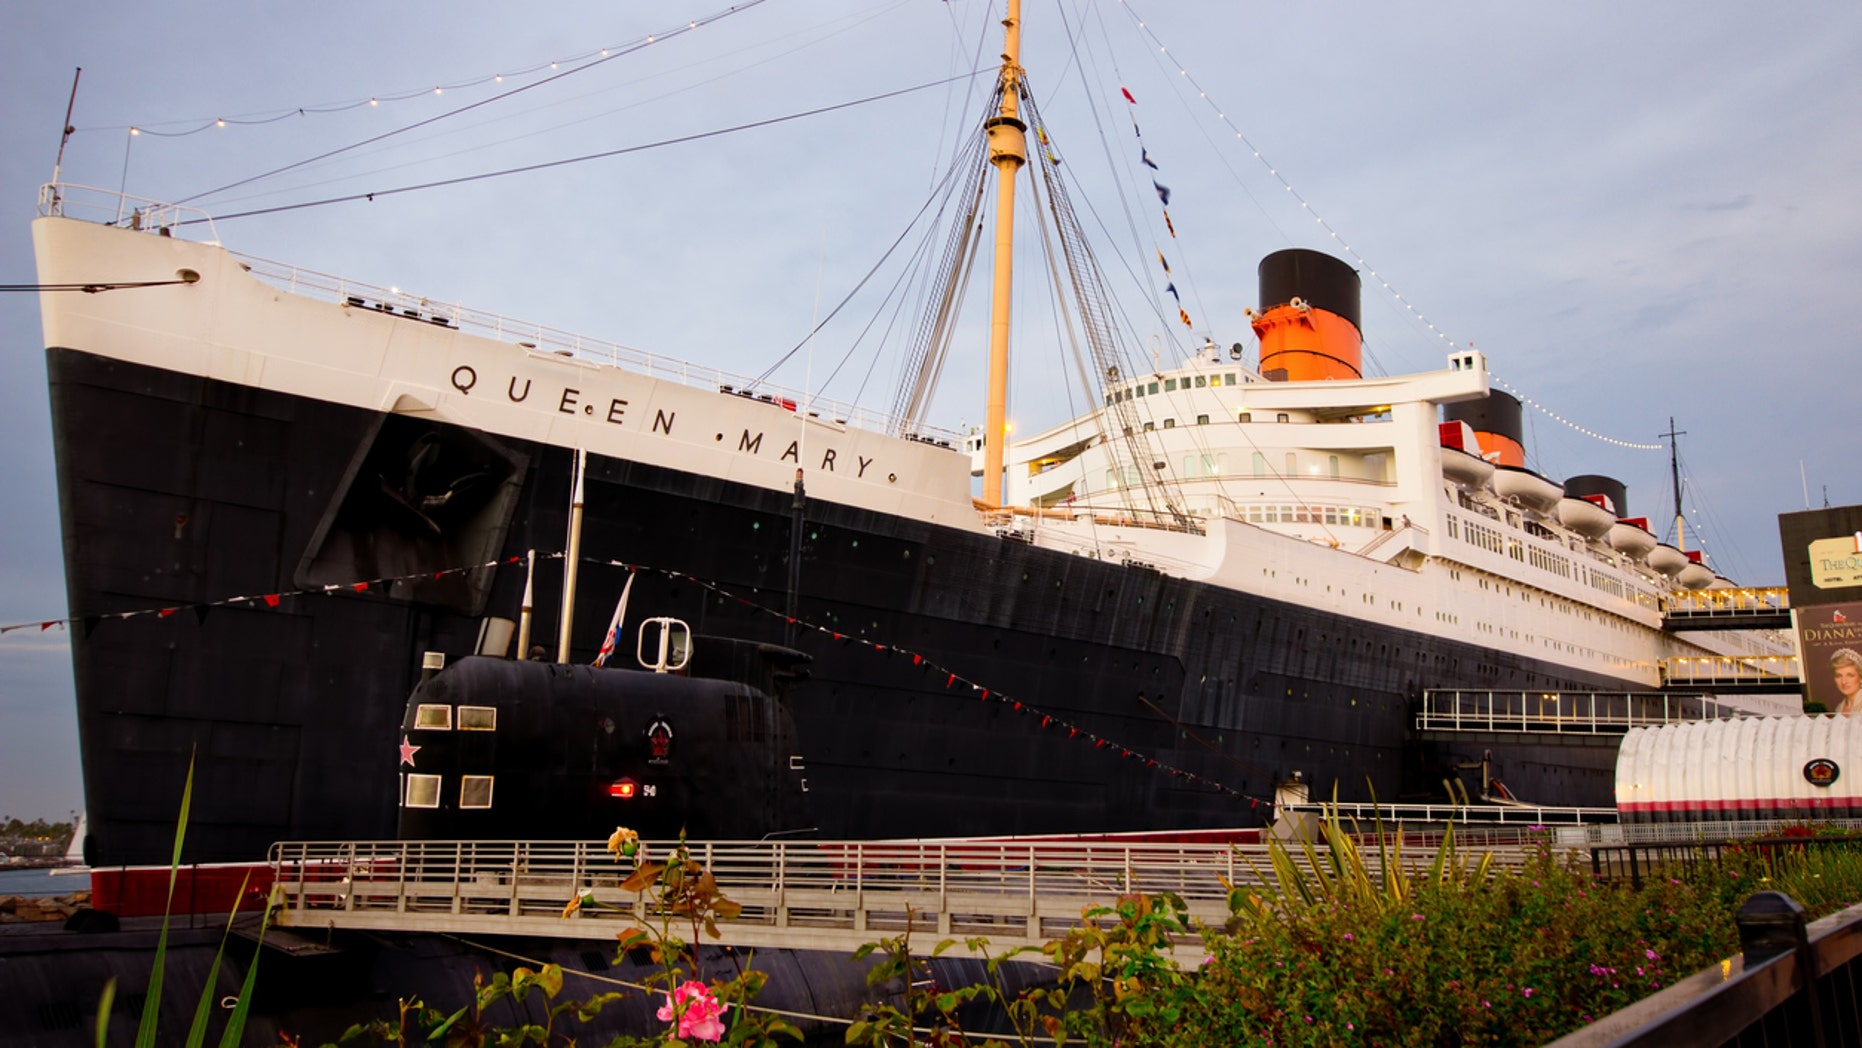 Queen Mary In Urgent Need Of Repairs To Prevent Sinking